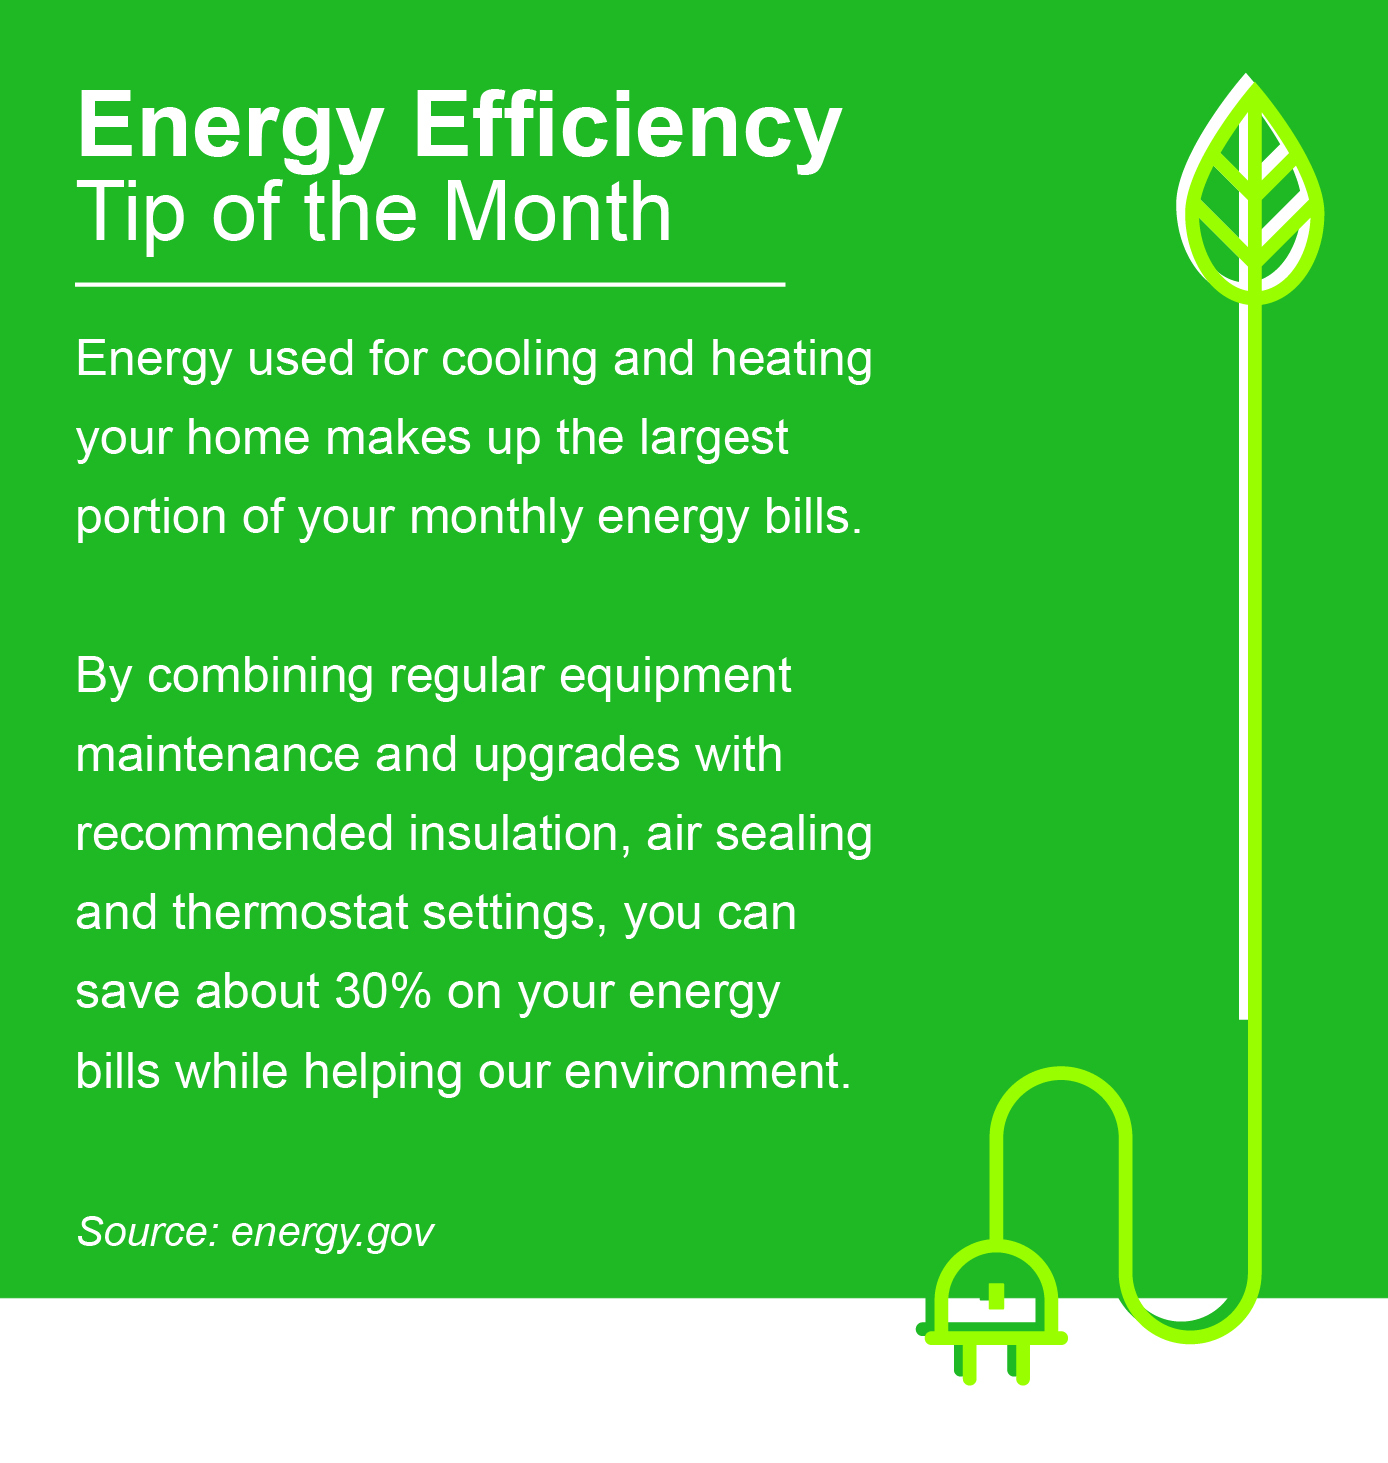 Energy Efficiency Tip of the Month: Energy used for cooling and heating your home makes up the largest portion of your monthly energy bills. By combining regular equipment maintenance and upgrades with recommended insulation, air sealing, and thermostat settings, you can save about 30% on your energy bills while helping our environment.